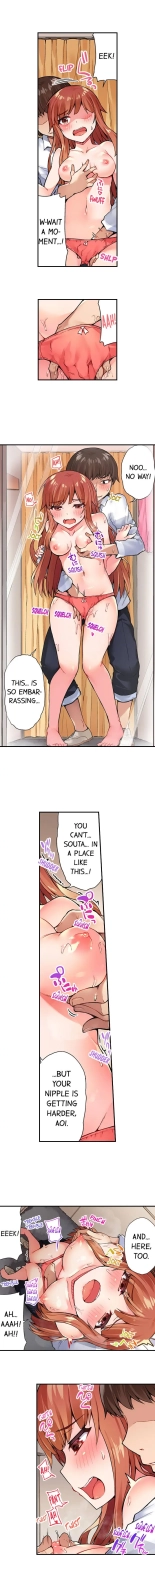 Traditional Job of Washing Girls' Body Ch. 1-181 : page 215